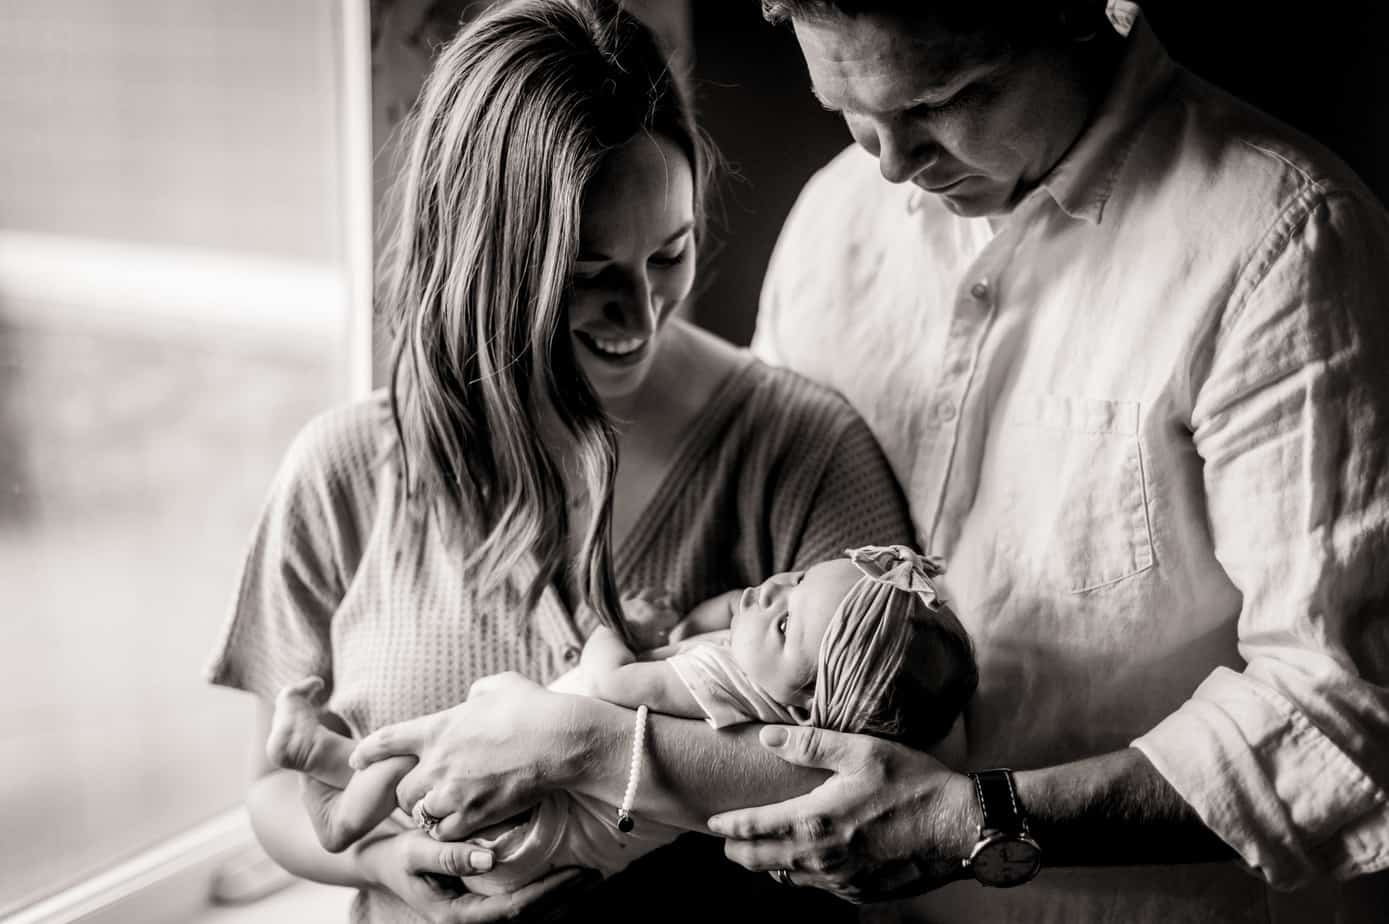 Parents hold their baby in the soft window light of the nursery